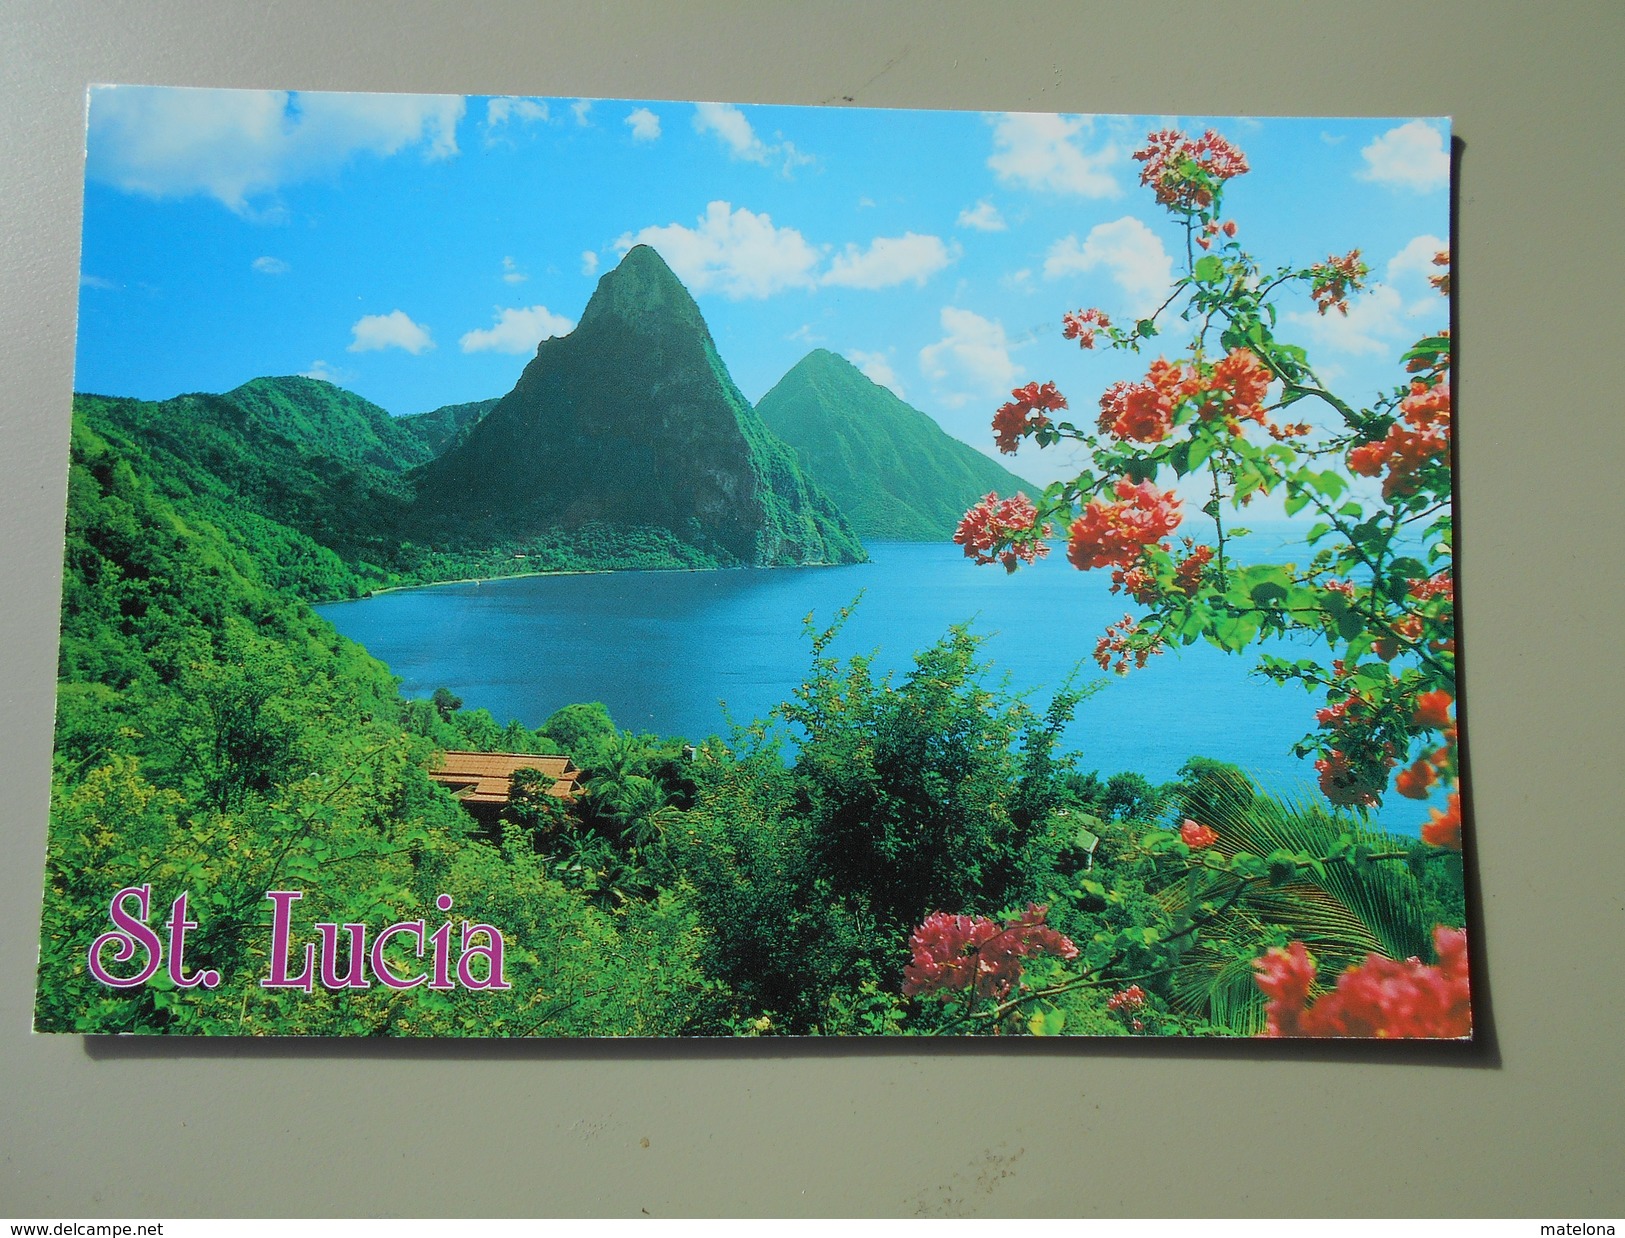 SAINTE LUCIE ST. LUCIA THE PITONS TWIN PEAKS RISING A HALF MILE OUT OF THE OCEAN.............. - Saint Lucia